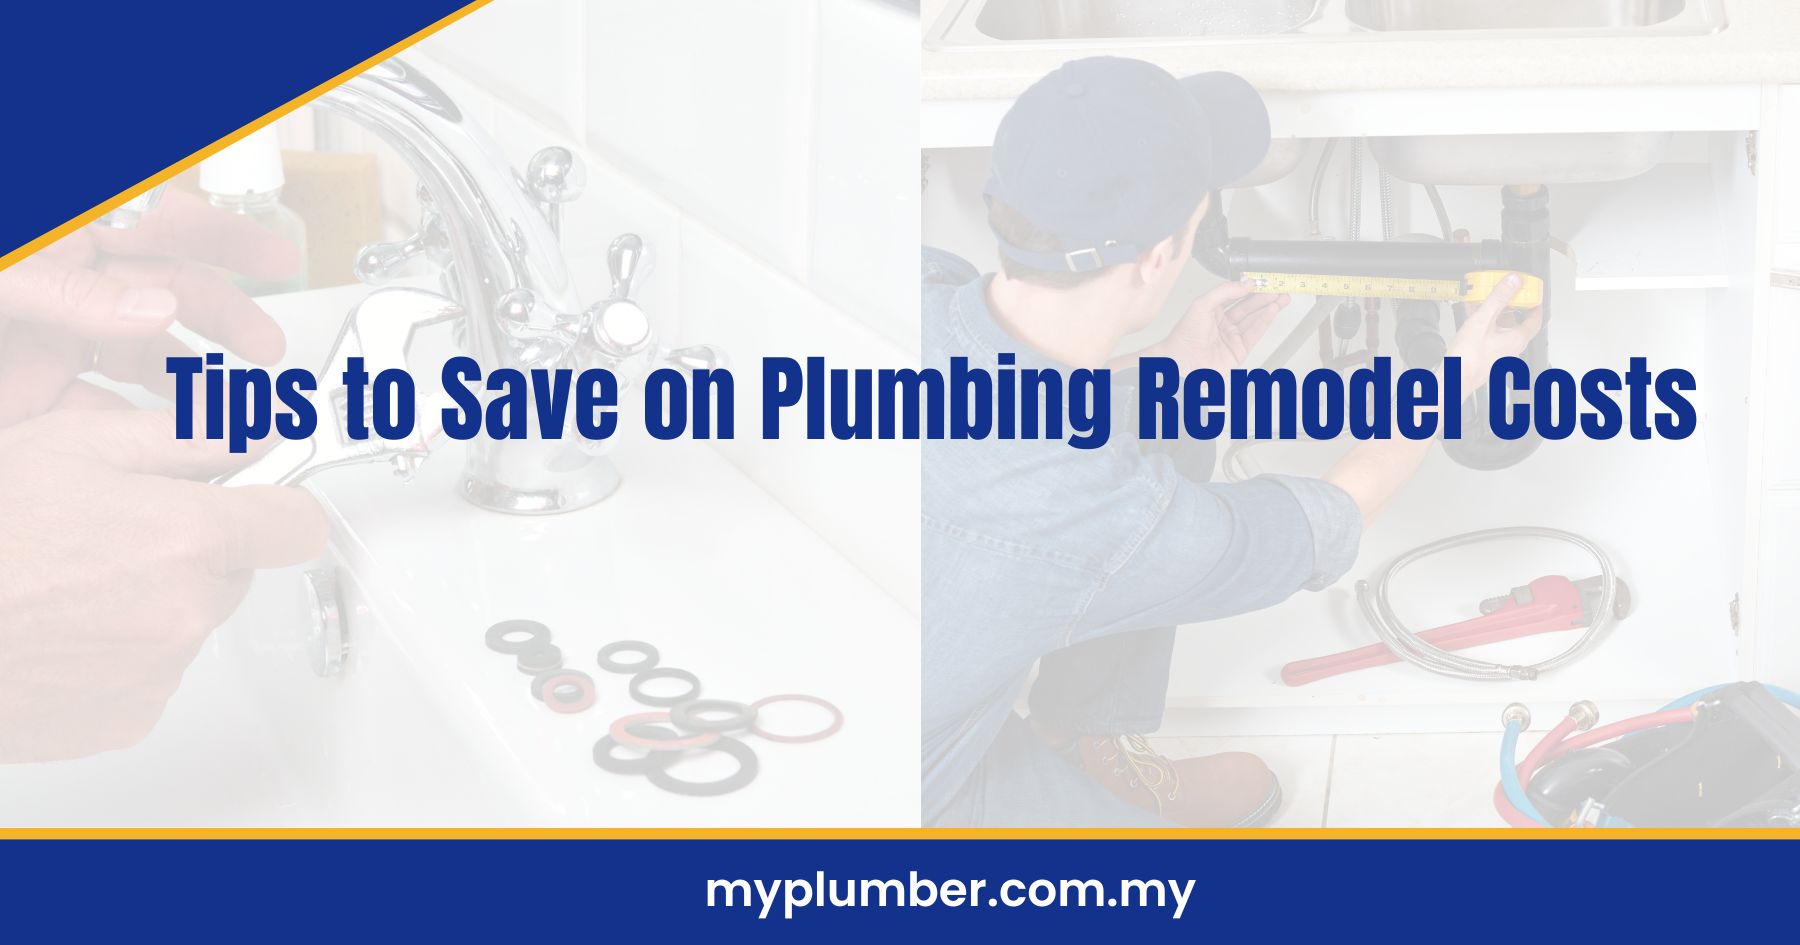 Tips to Save on Plumbing Remodel Costs